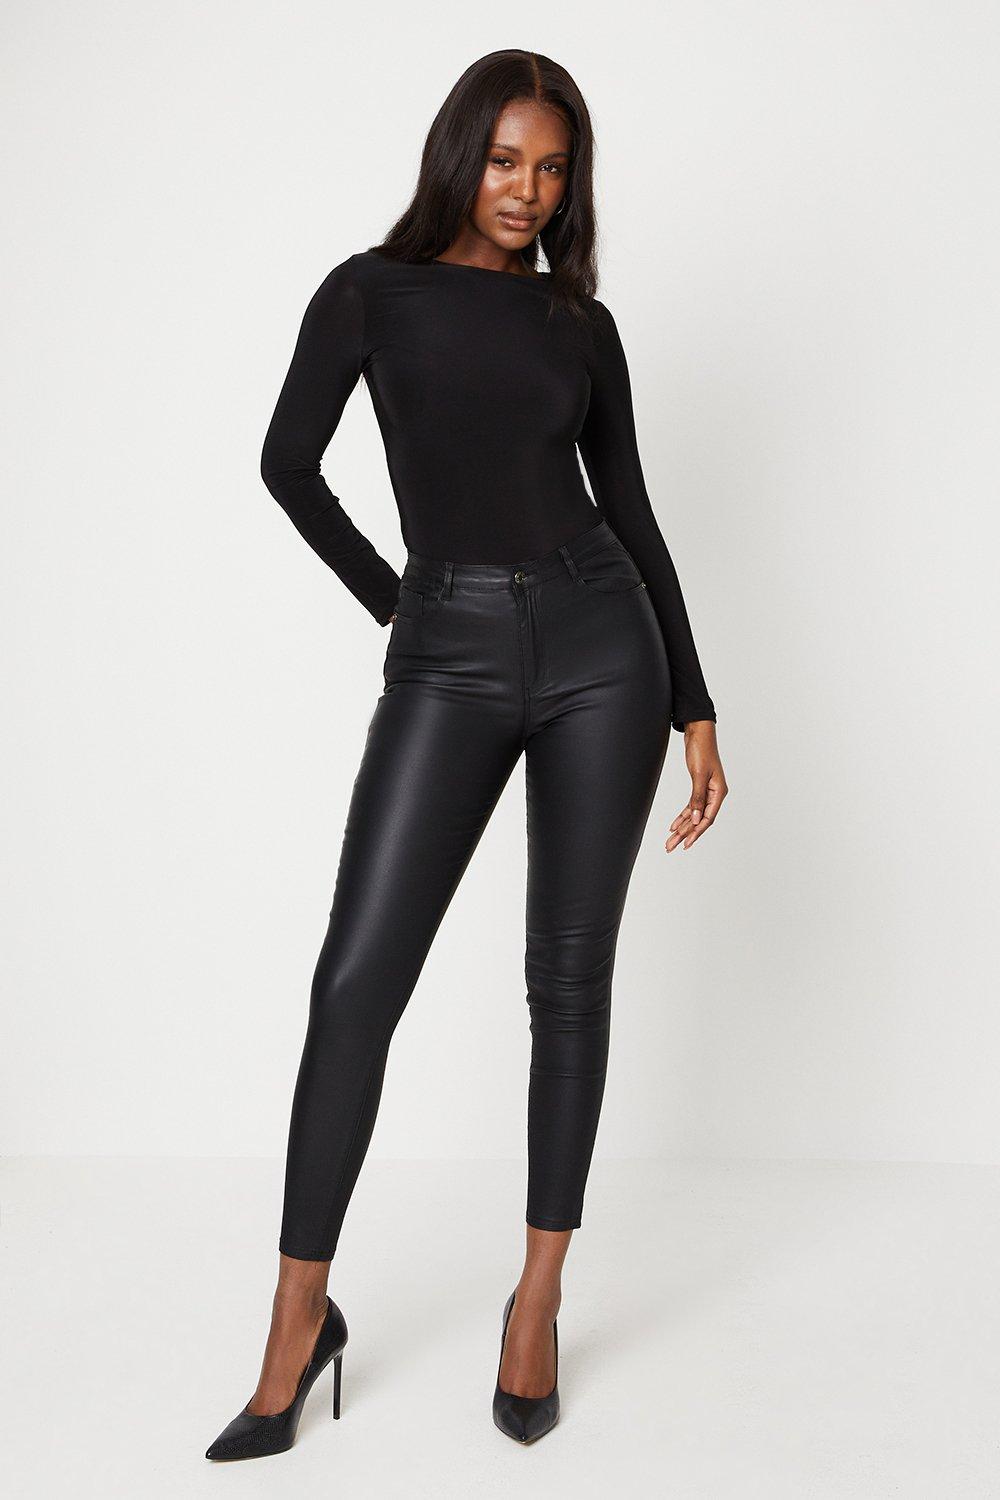 Women’s High Waisted Coated Skinny Jeans - black - L